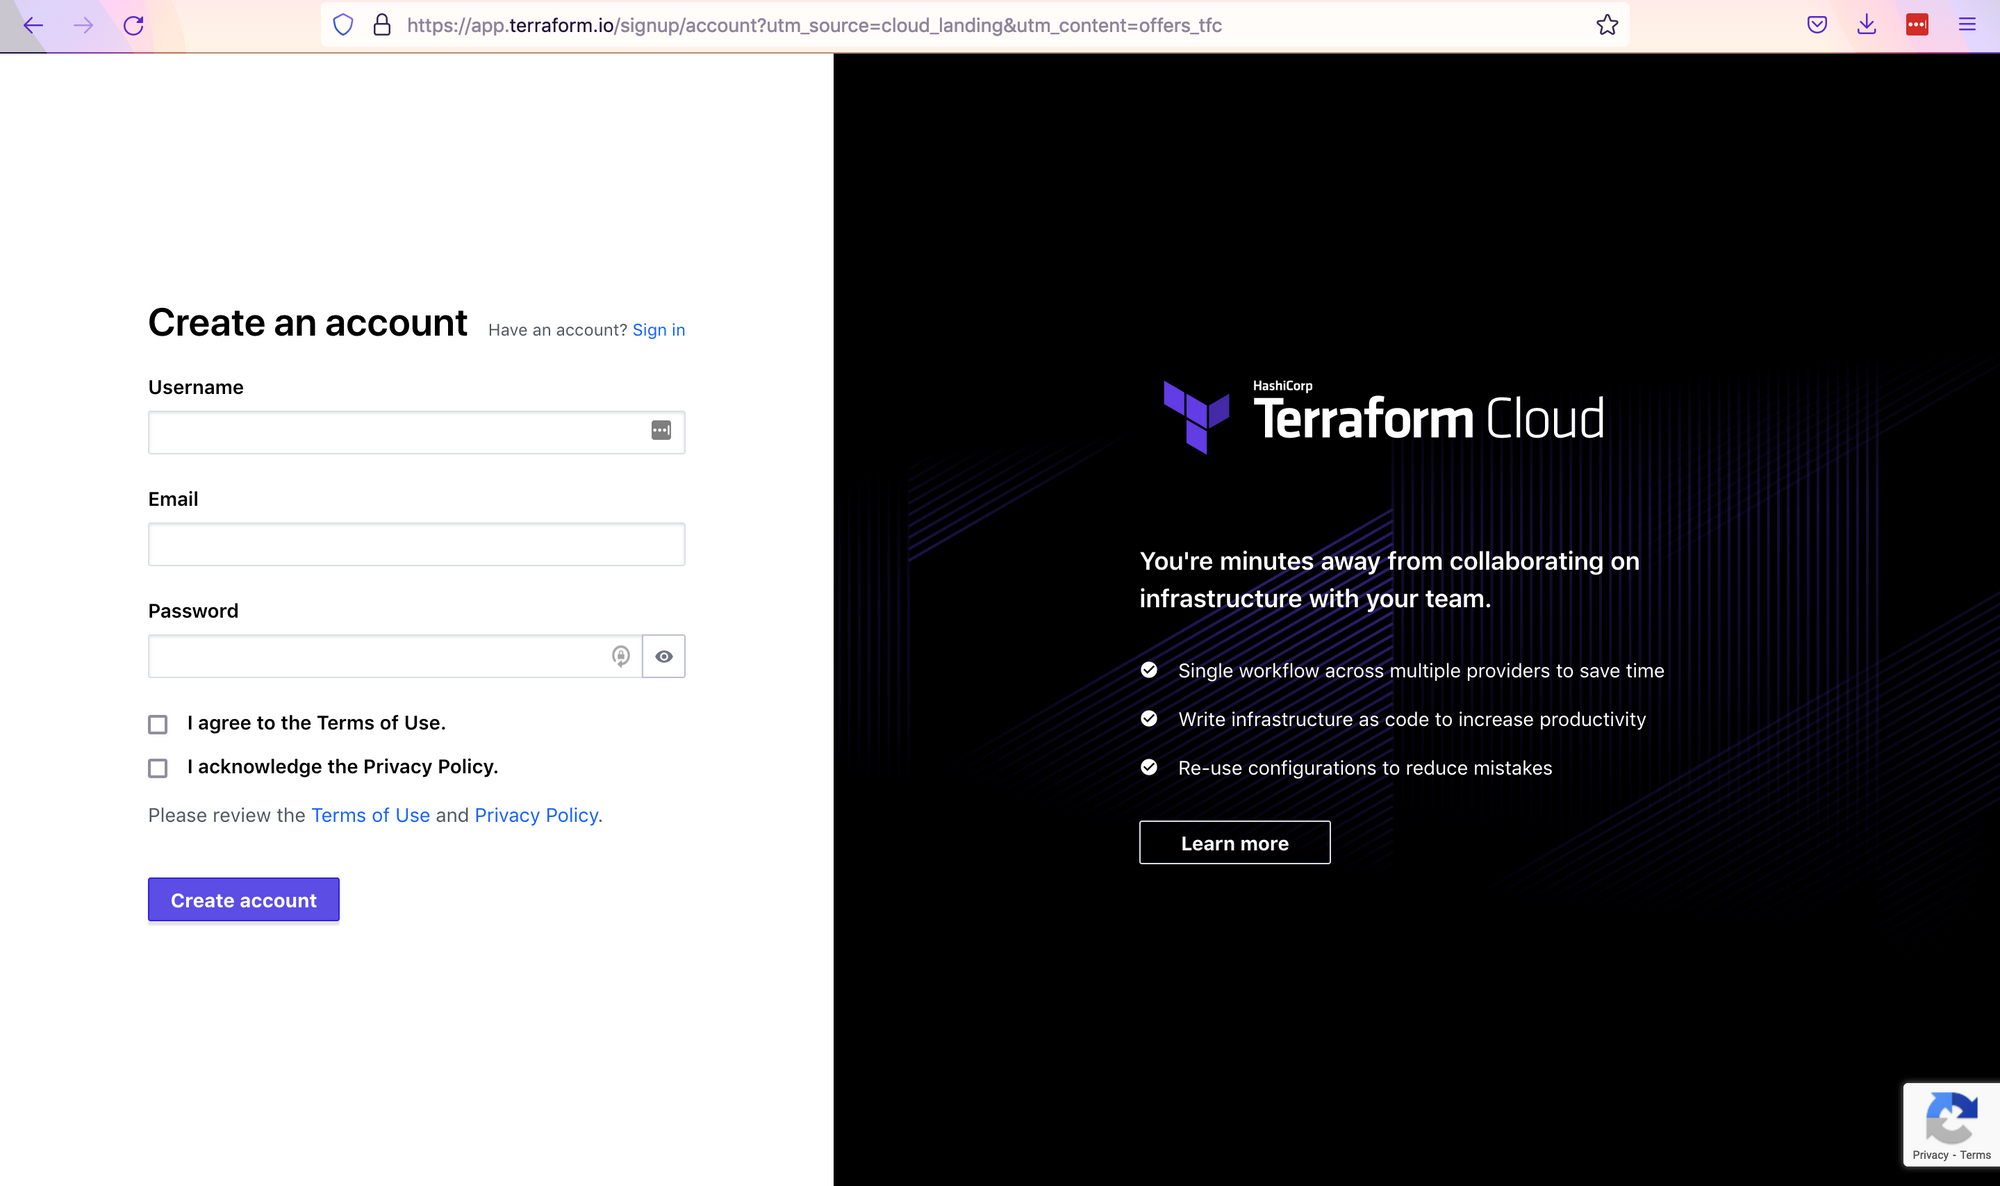 Automating infrastructure deployments with Terraform Cloud and GitHub Actions